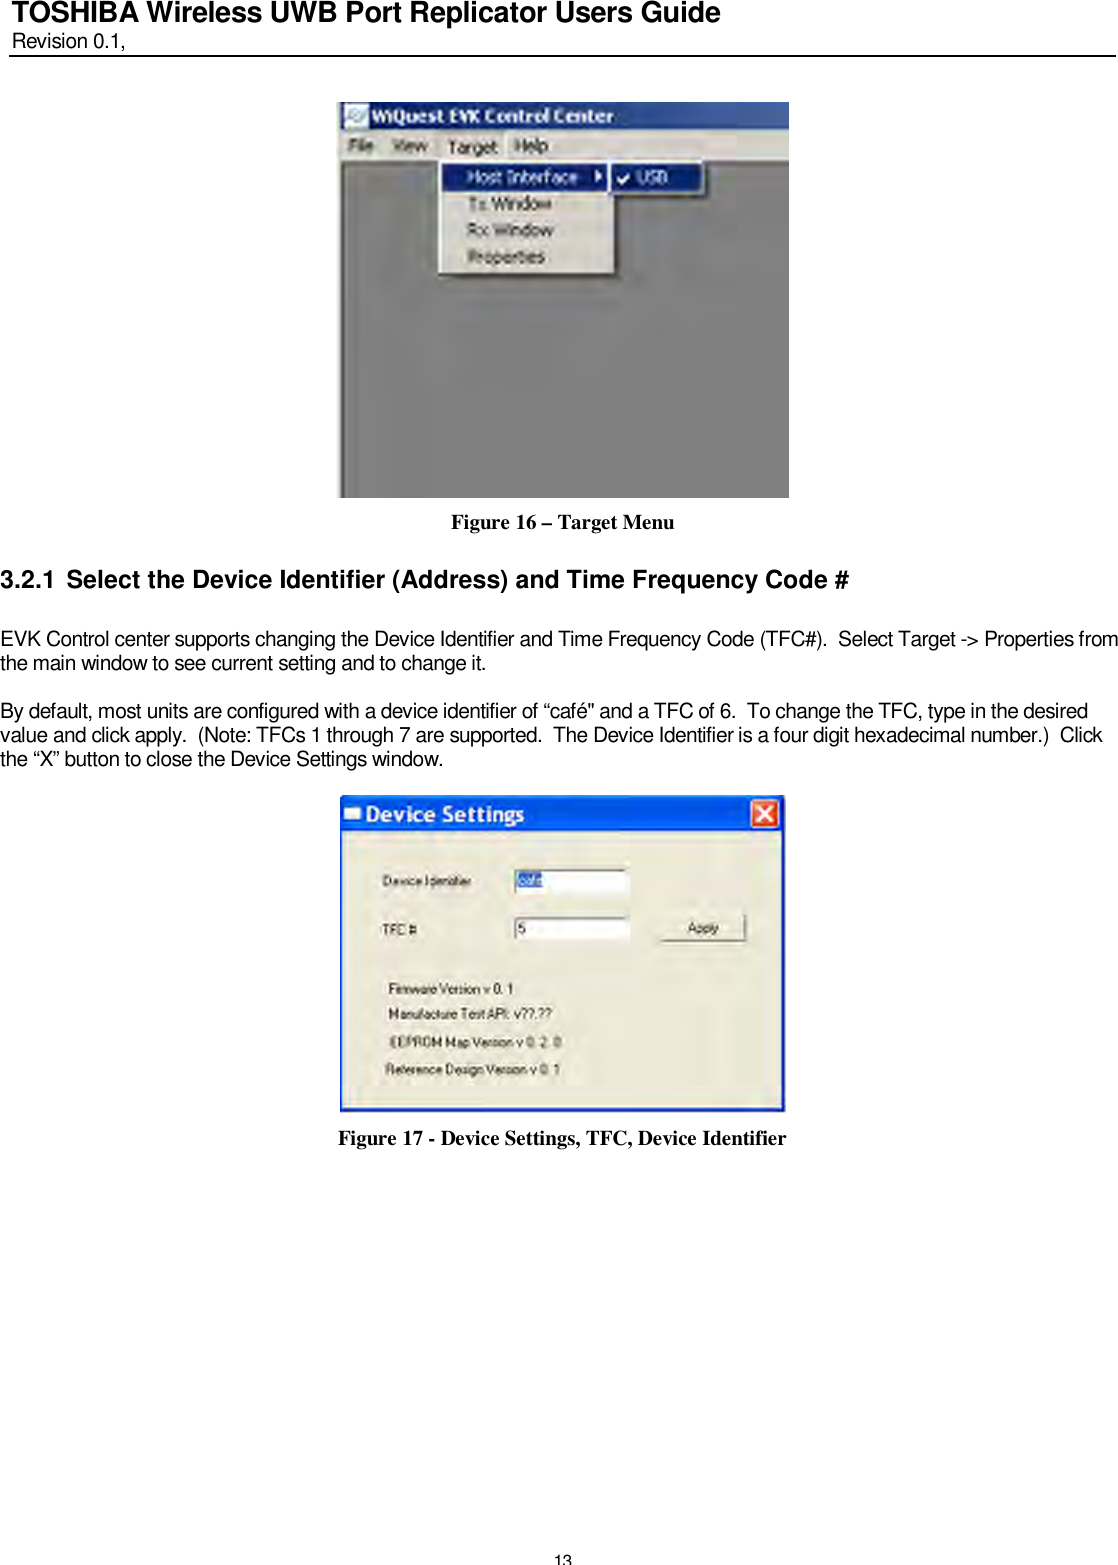   13 TOSHIBA Wireless UWB Port Replicator Users Guide Revision 0.1,    Figure 16 – Target Menu 3.2.1 Select the Device Identifier (Address) and Time Frequency Code #  EVK Control center supports changing the Device Identifier and Time Frequency Code (TFC#).  Select Target -&gt; Properties from the main window to see current setting and to change it.  By default, most units are configured with a device identifier of “café&quot; and a TFC of 6.  To change the TFC, type in the desired value and click apply.  (Note: TFCs 1 through 7 are supported.  The Device Identifier is a four digit hexadecimal number.)  Click the “X” button to close the Device Settings window.   Figure 17 - Device Settings, TFC, Device Identifier 